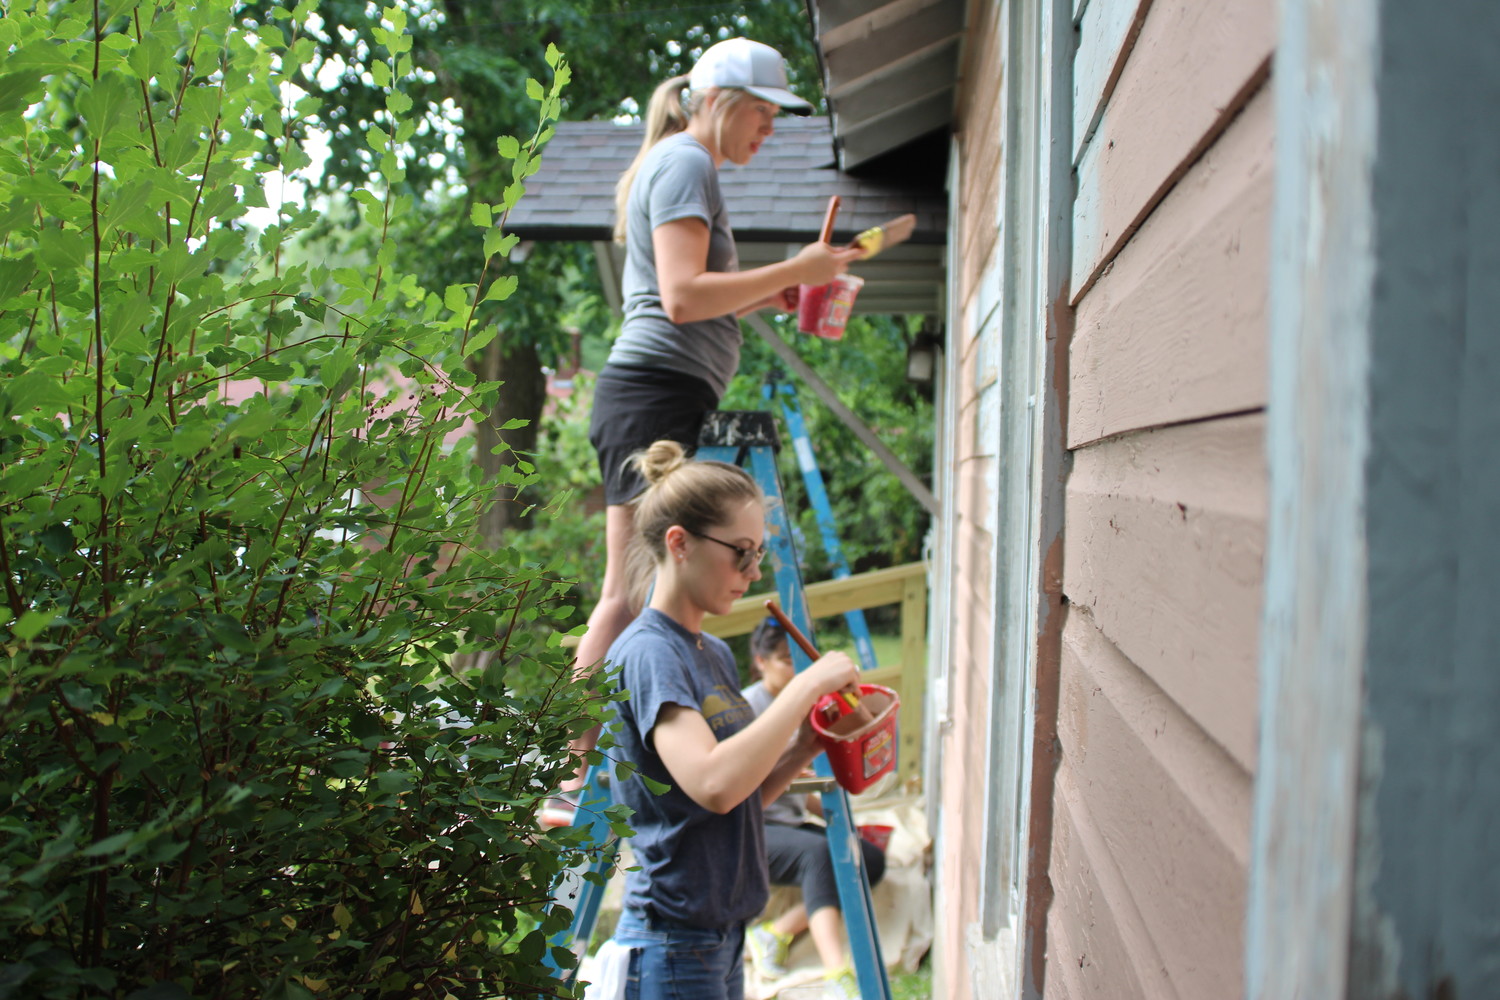 Volunteers paint a home in Woodland Heights during a June Rock the Block neighborhood cleanup event.